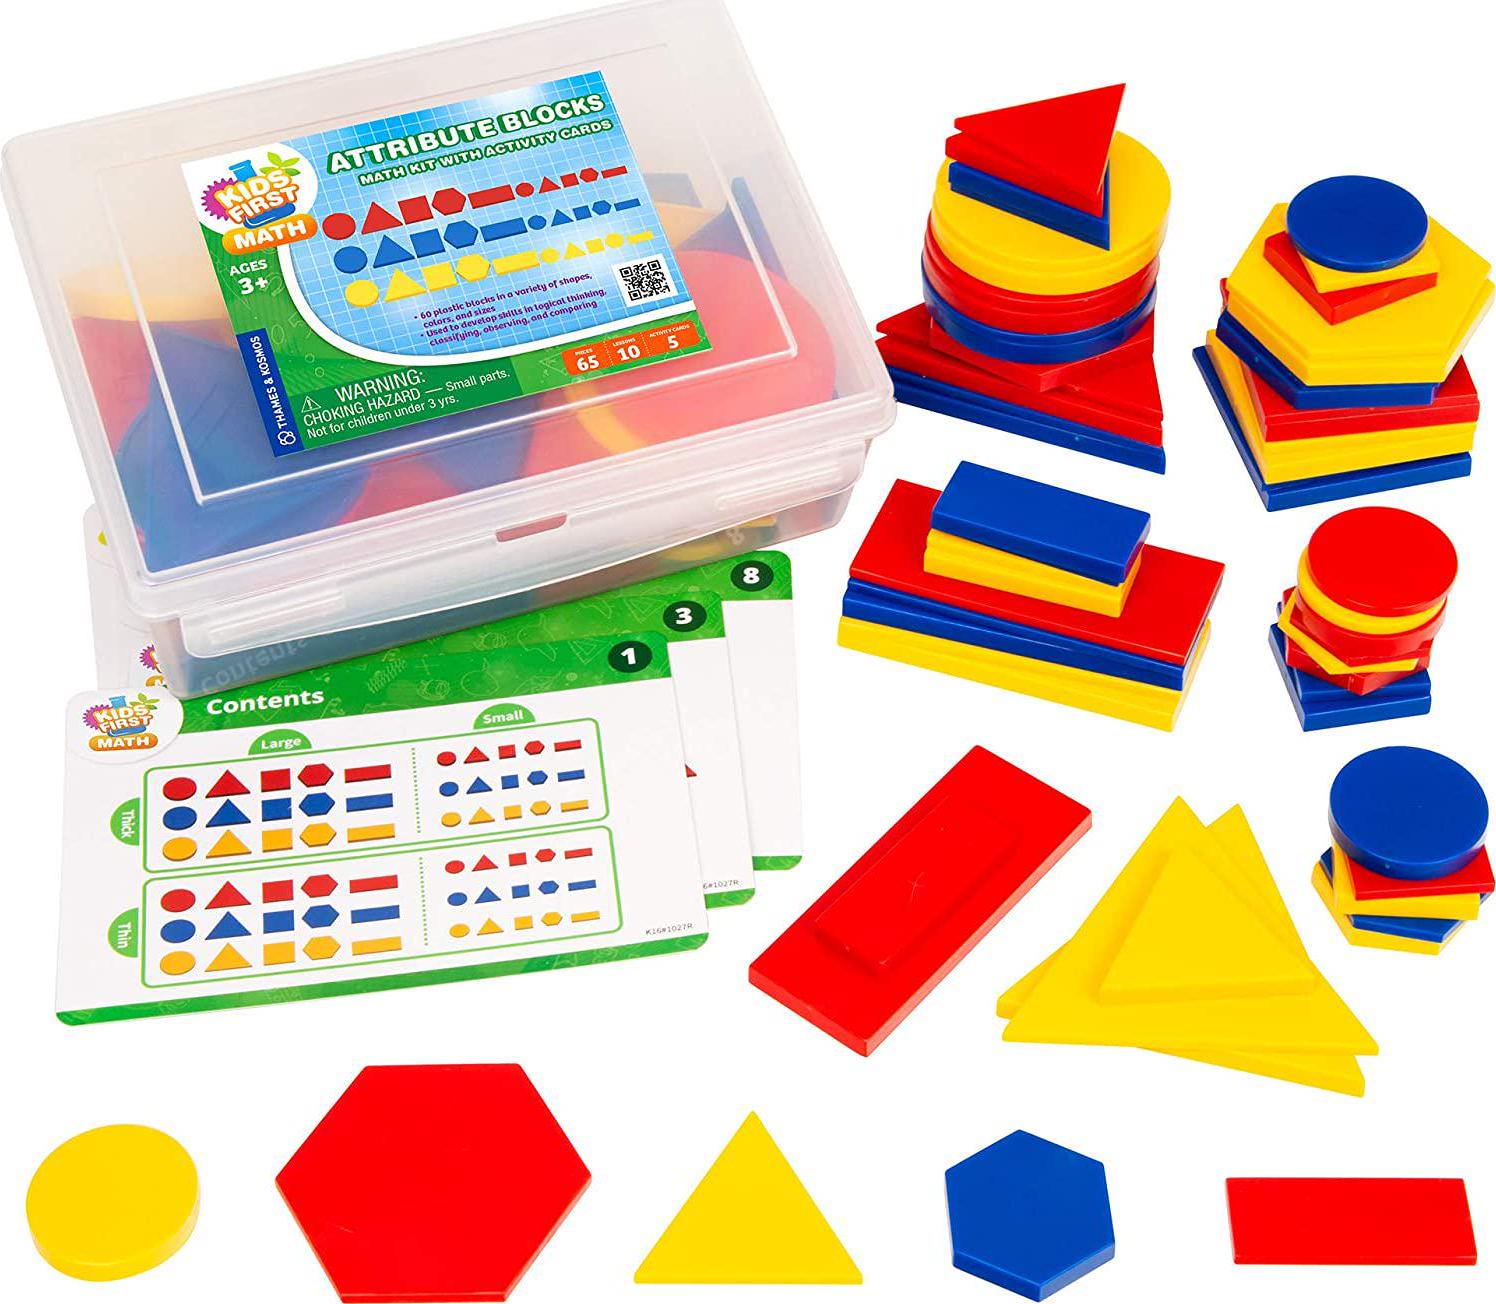 THAMES & KOSMOS, Kids First Math: Attribute Blocks Math Kit with Activity Cards | Develop Skills in Logical Thinking, Classifying, Comparing | Visual Hands-on Math for at-Home or Classroom Learning, Ages 3+